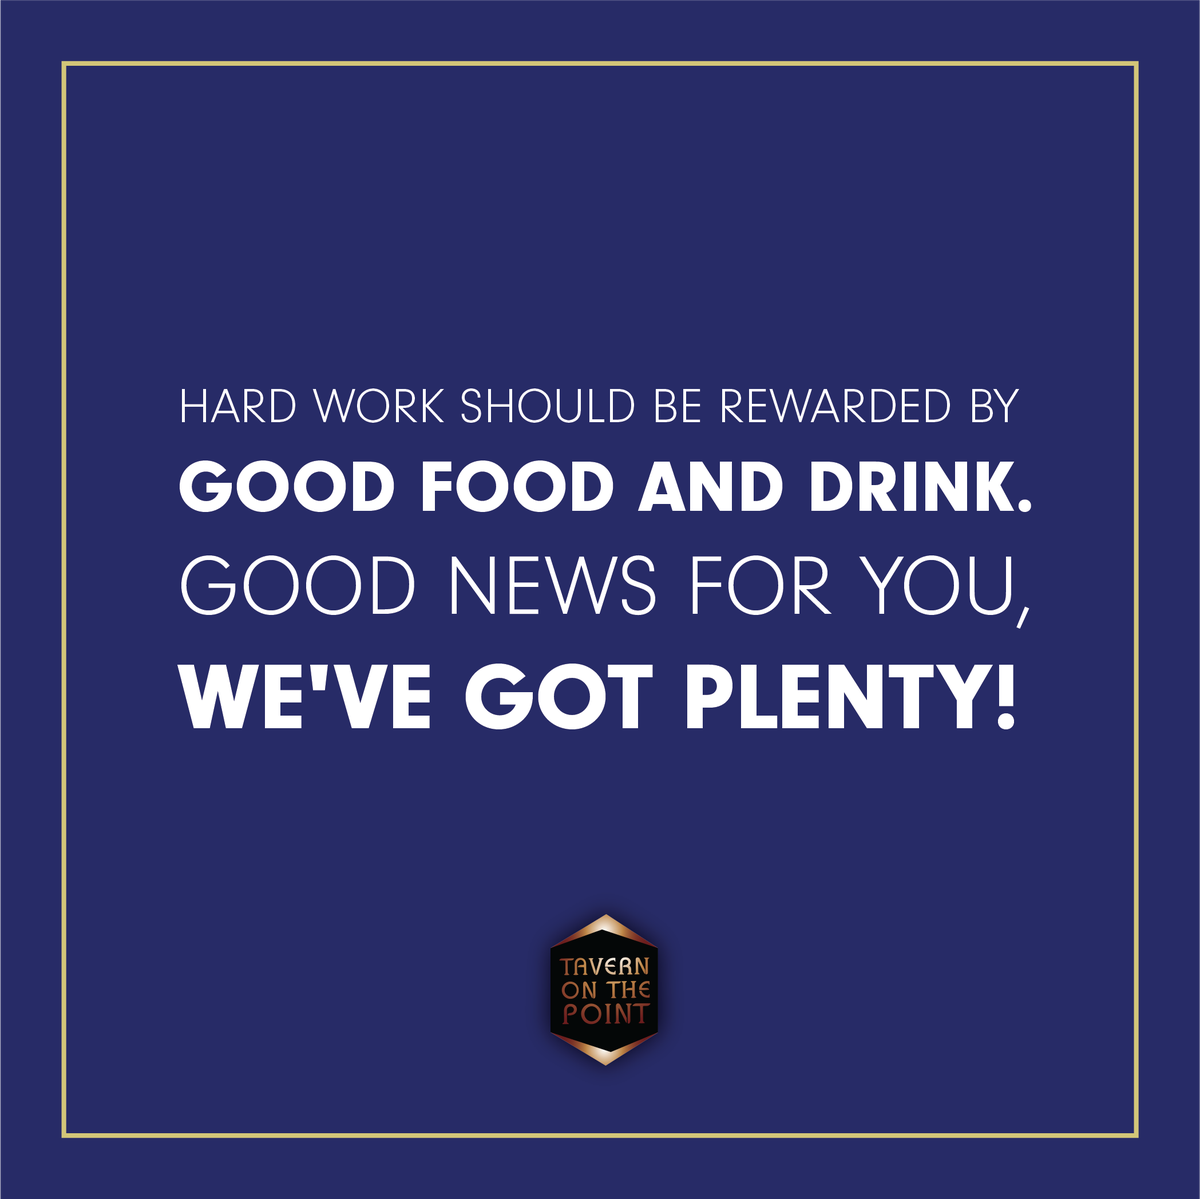 Food, drinks, and entertainment that are #AlwaysOnPoint .
Make your reservation today at tavernonthepoint.com